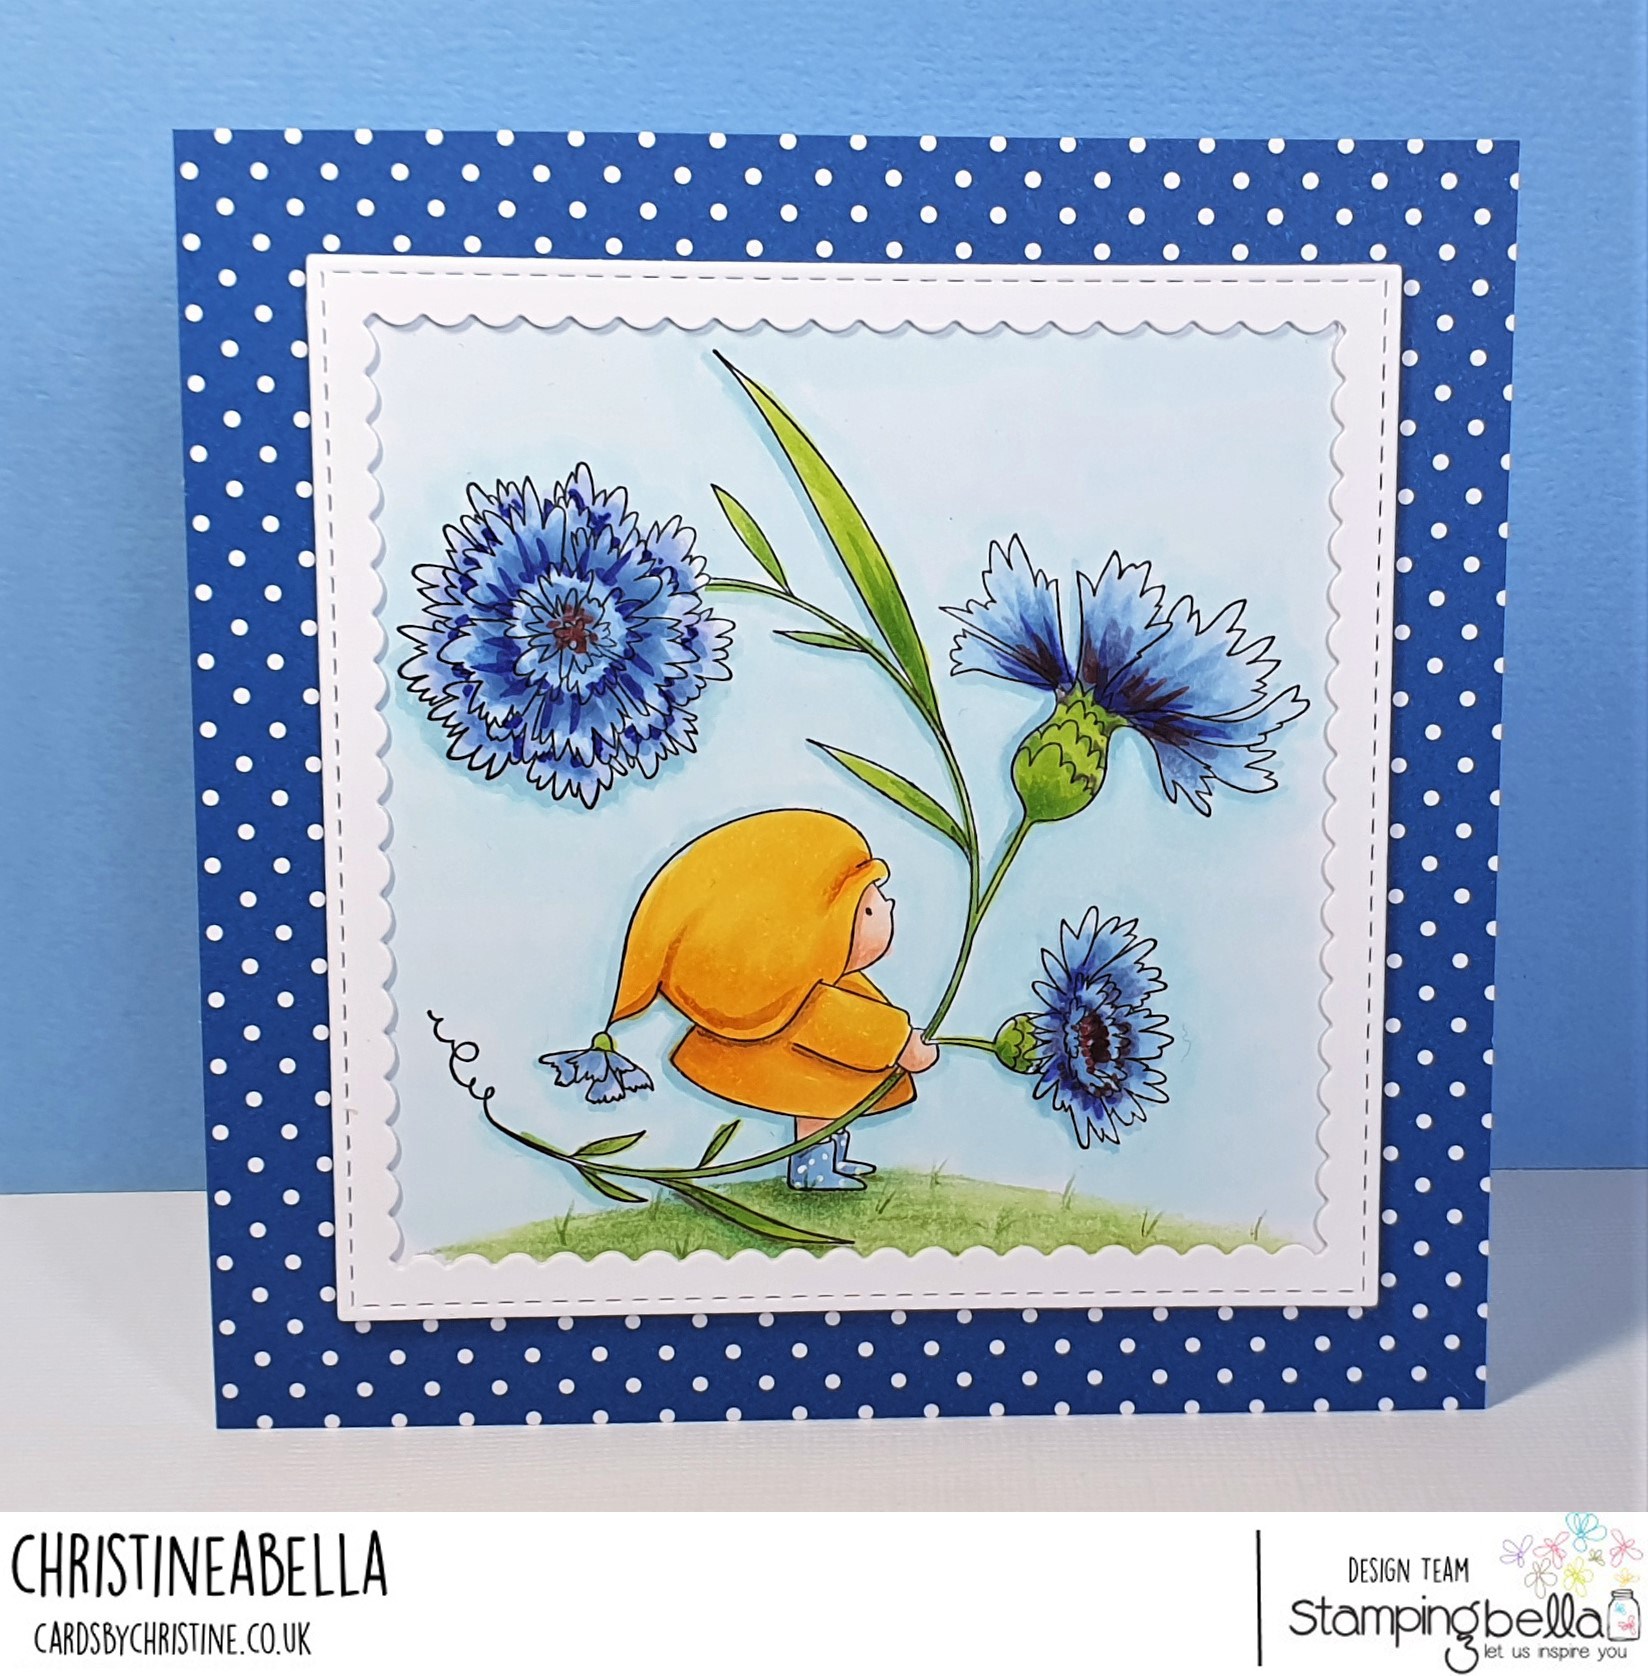 www.stampingbella.com : Rubber stamp used: BUNDLE GIRL WITH A CORNFLOWER Card by CHRISTINE LEVISON